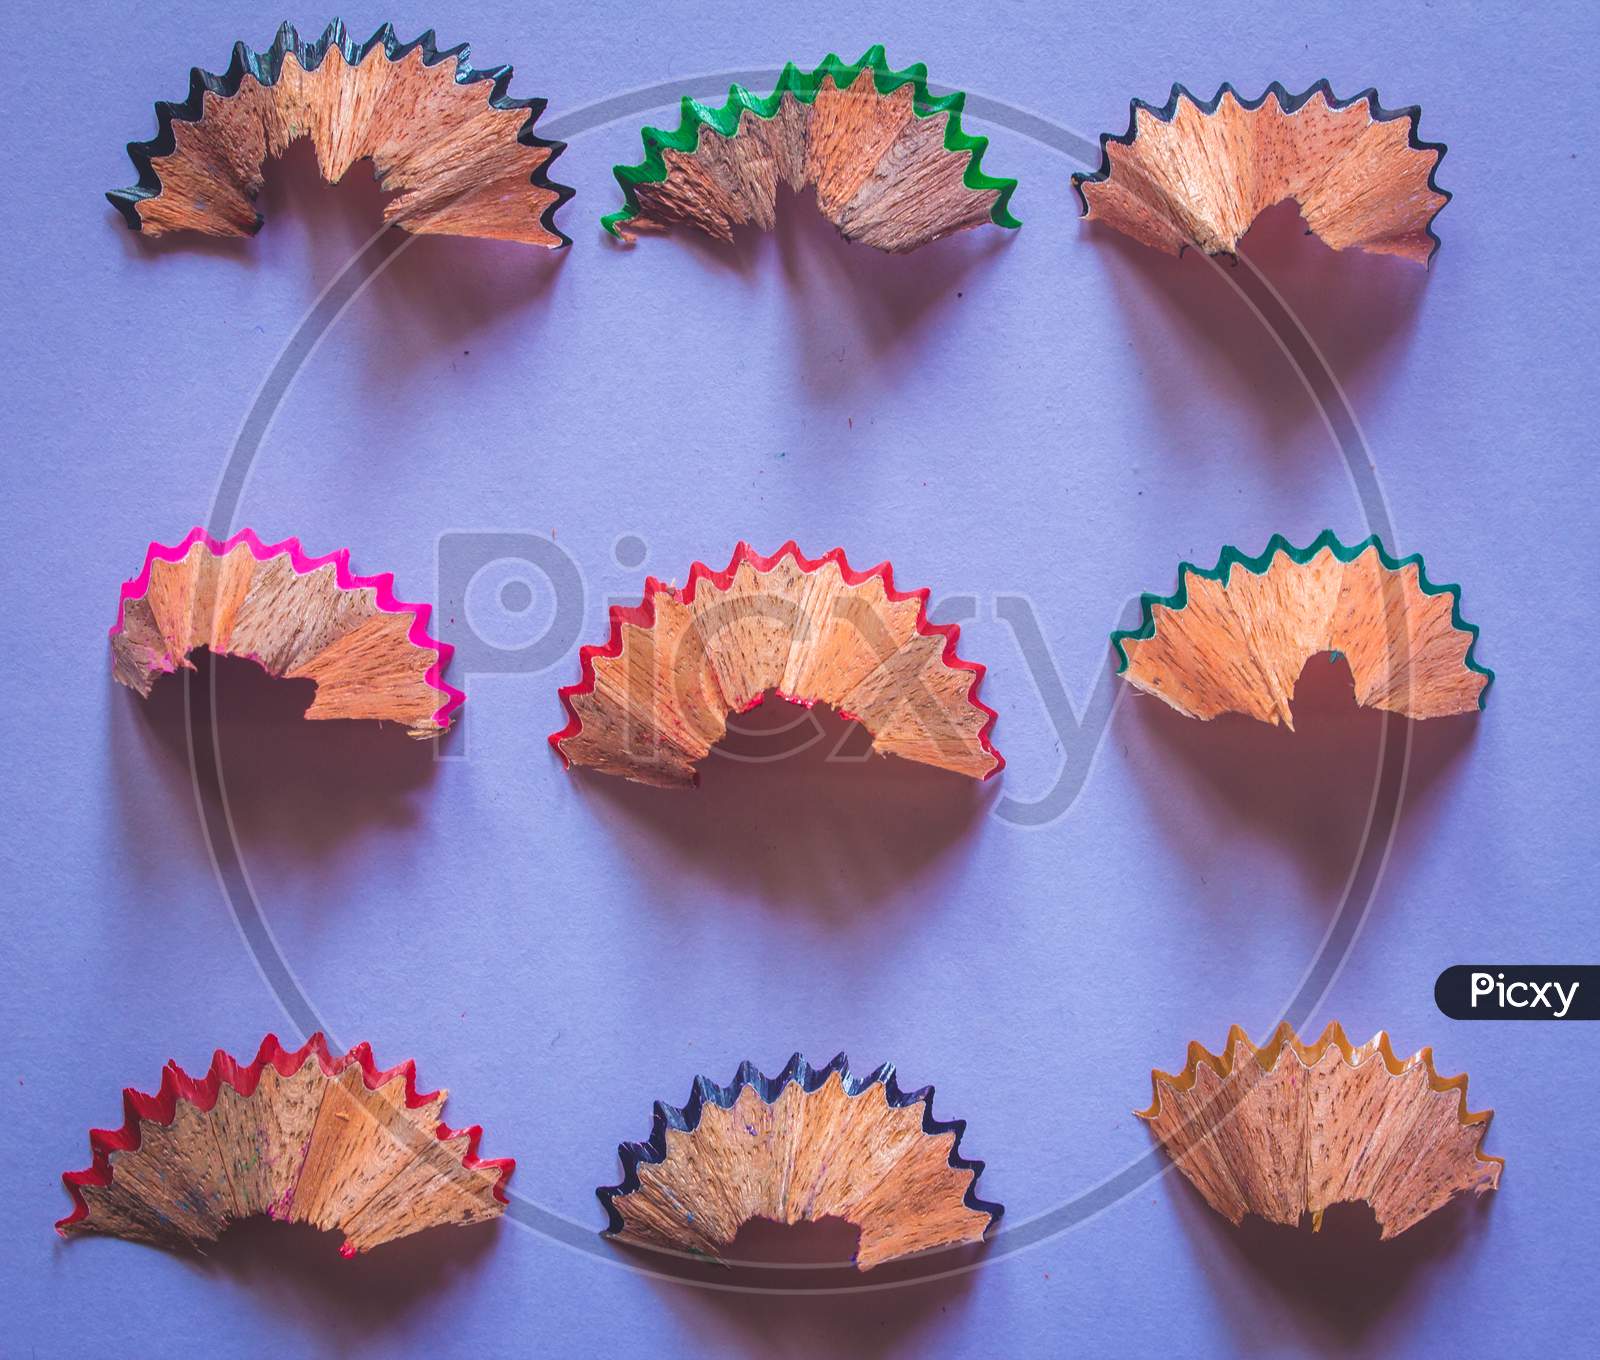 Pencil Shavings Arranged In Rows And Columns.